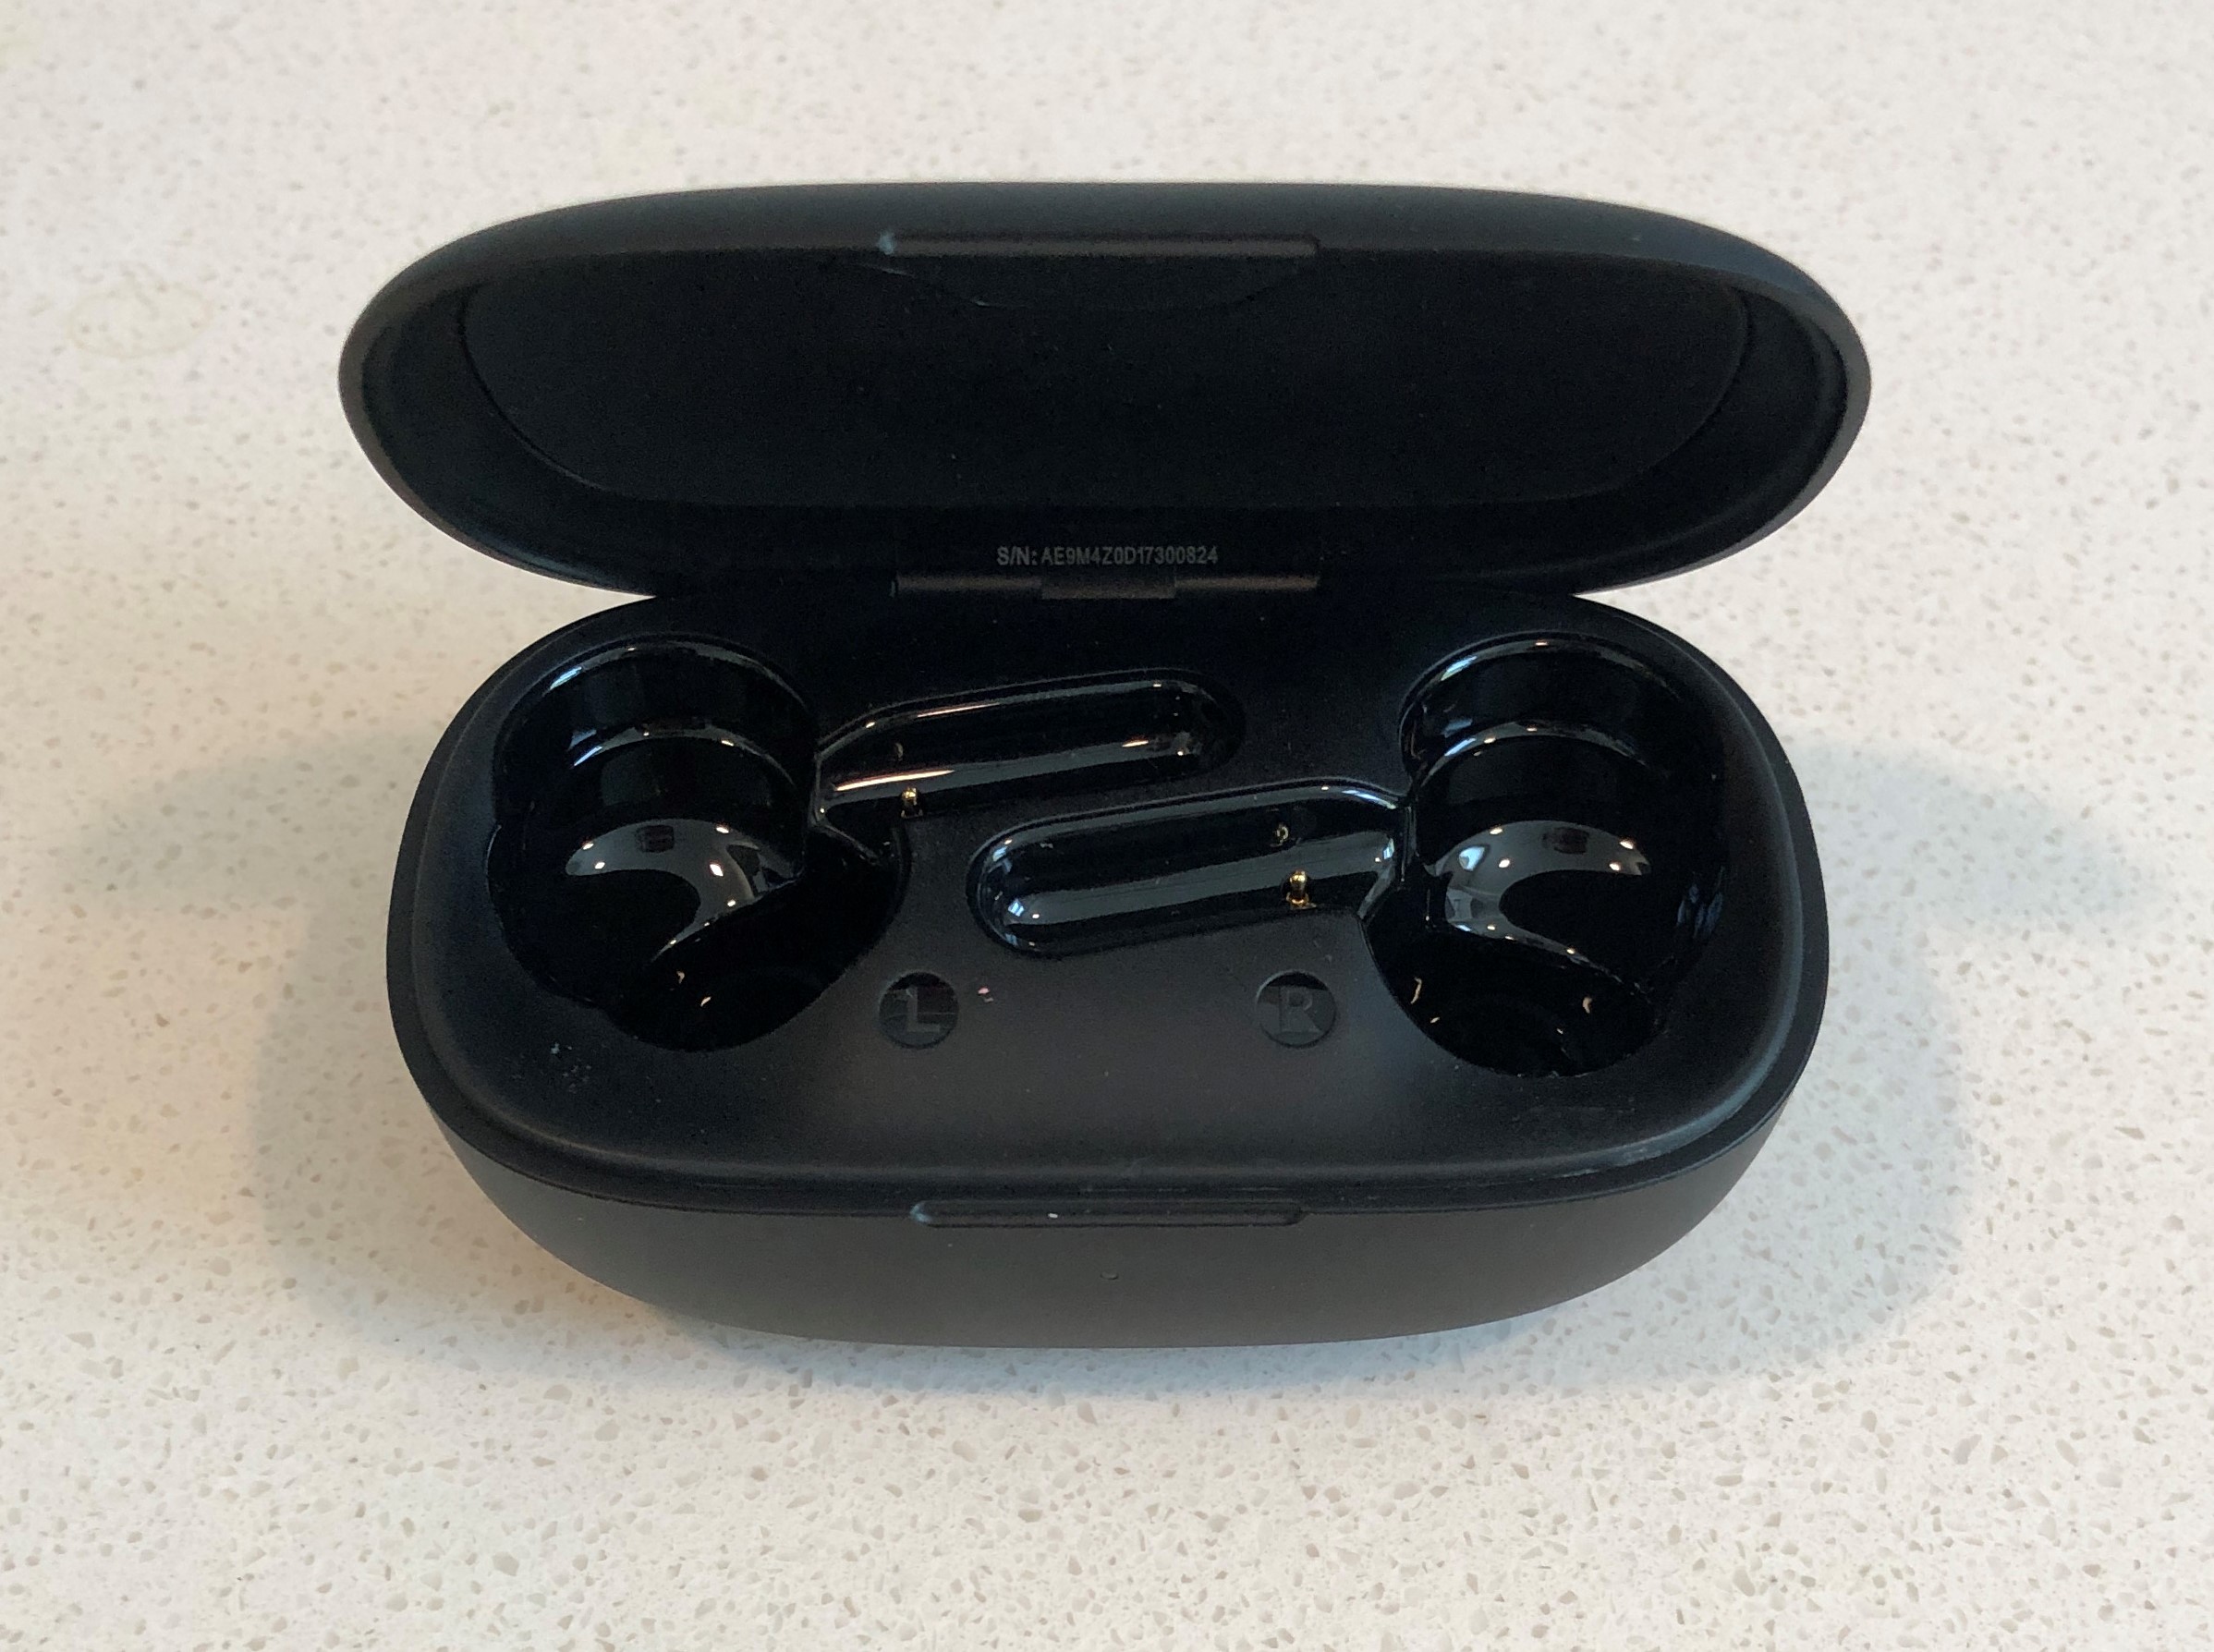 Soundcore Life P2 charging and carrying case open inside view